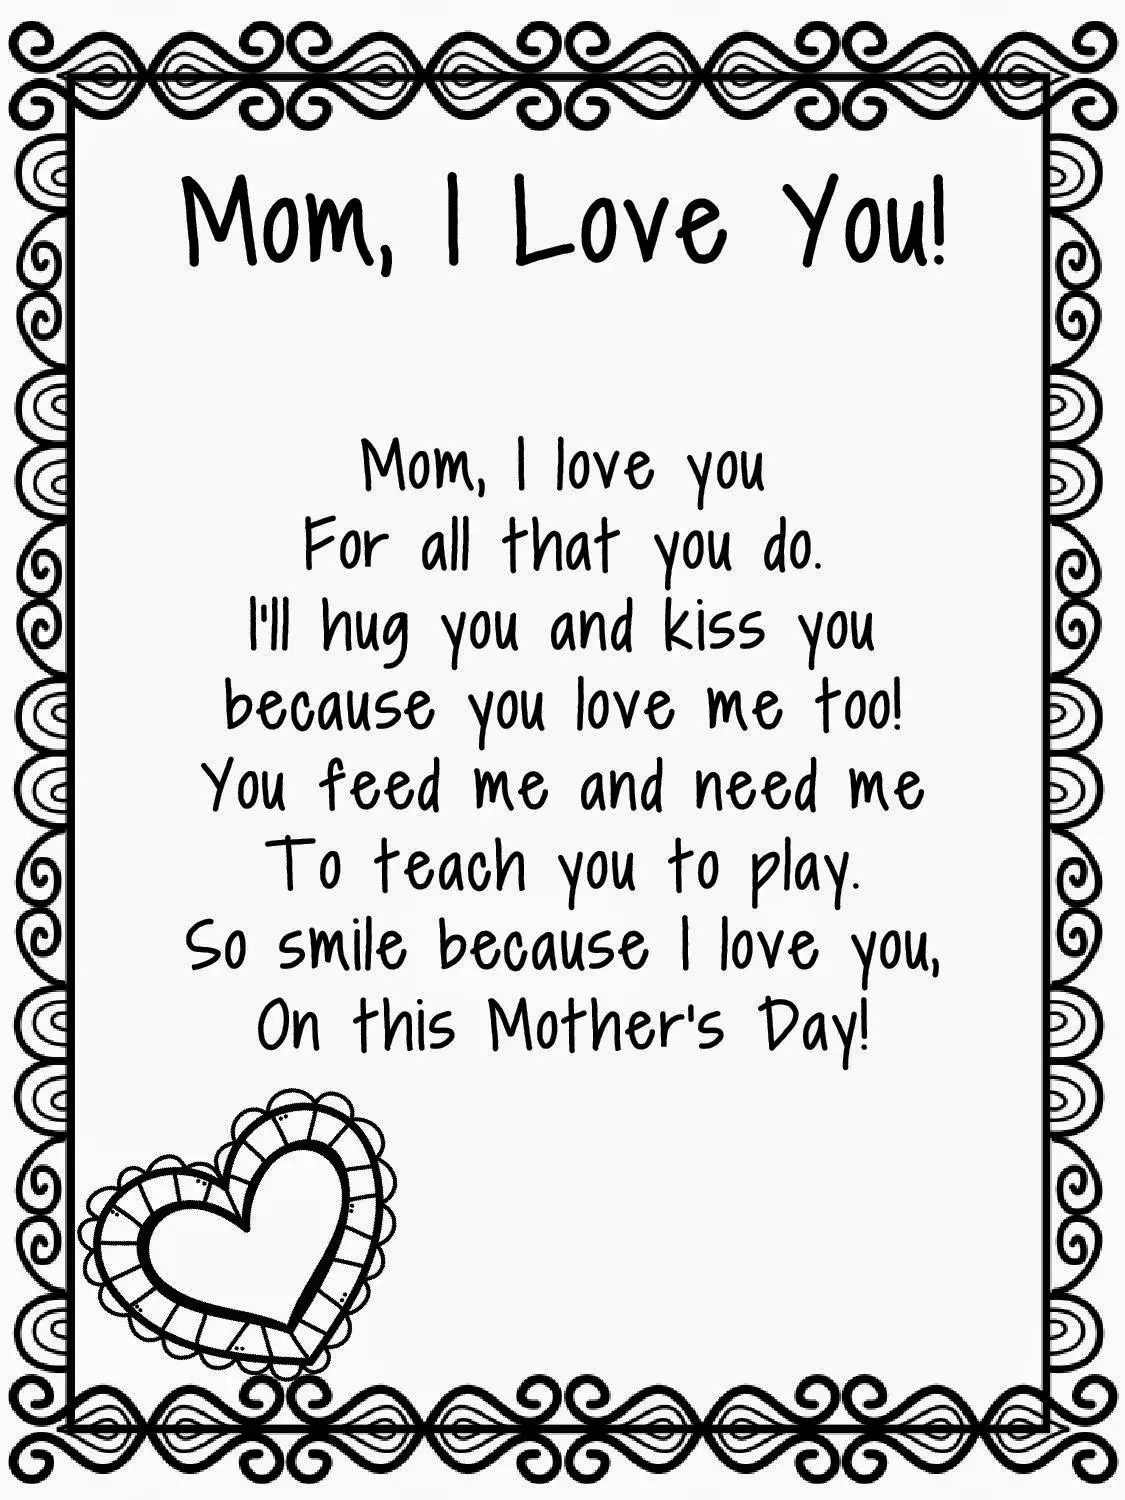 Children's mothers day Poems